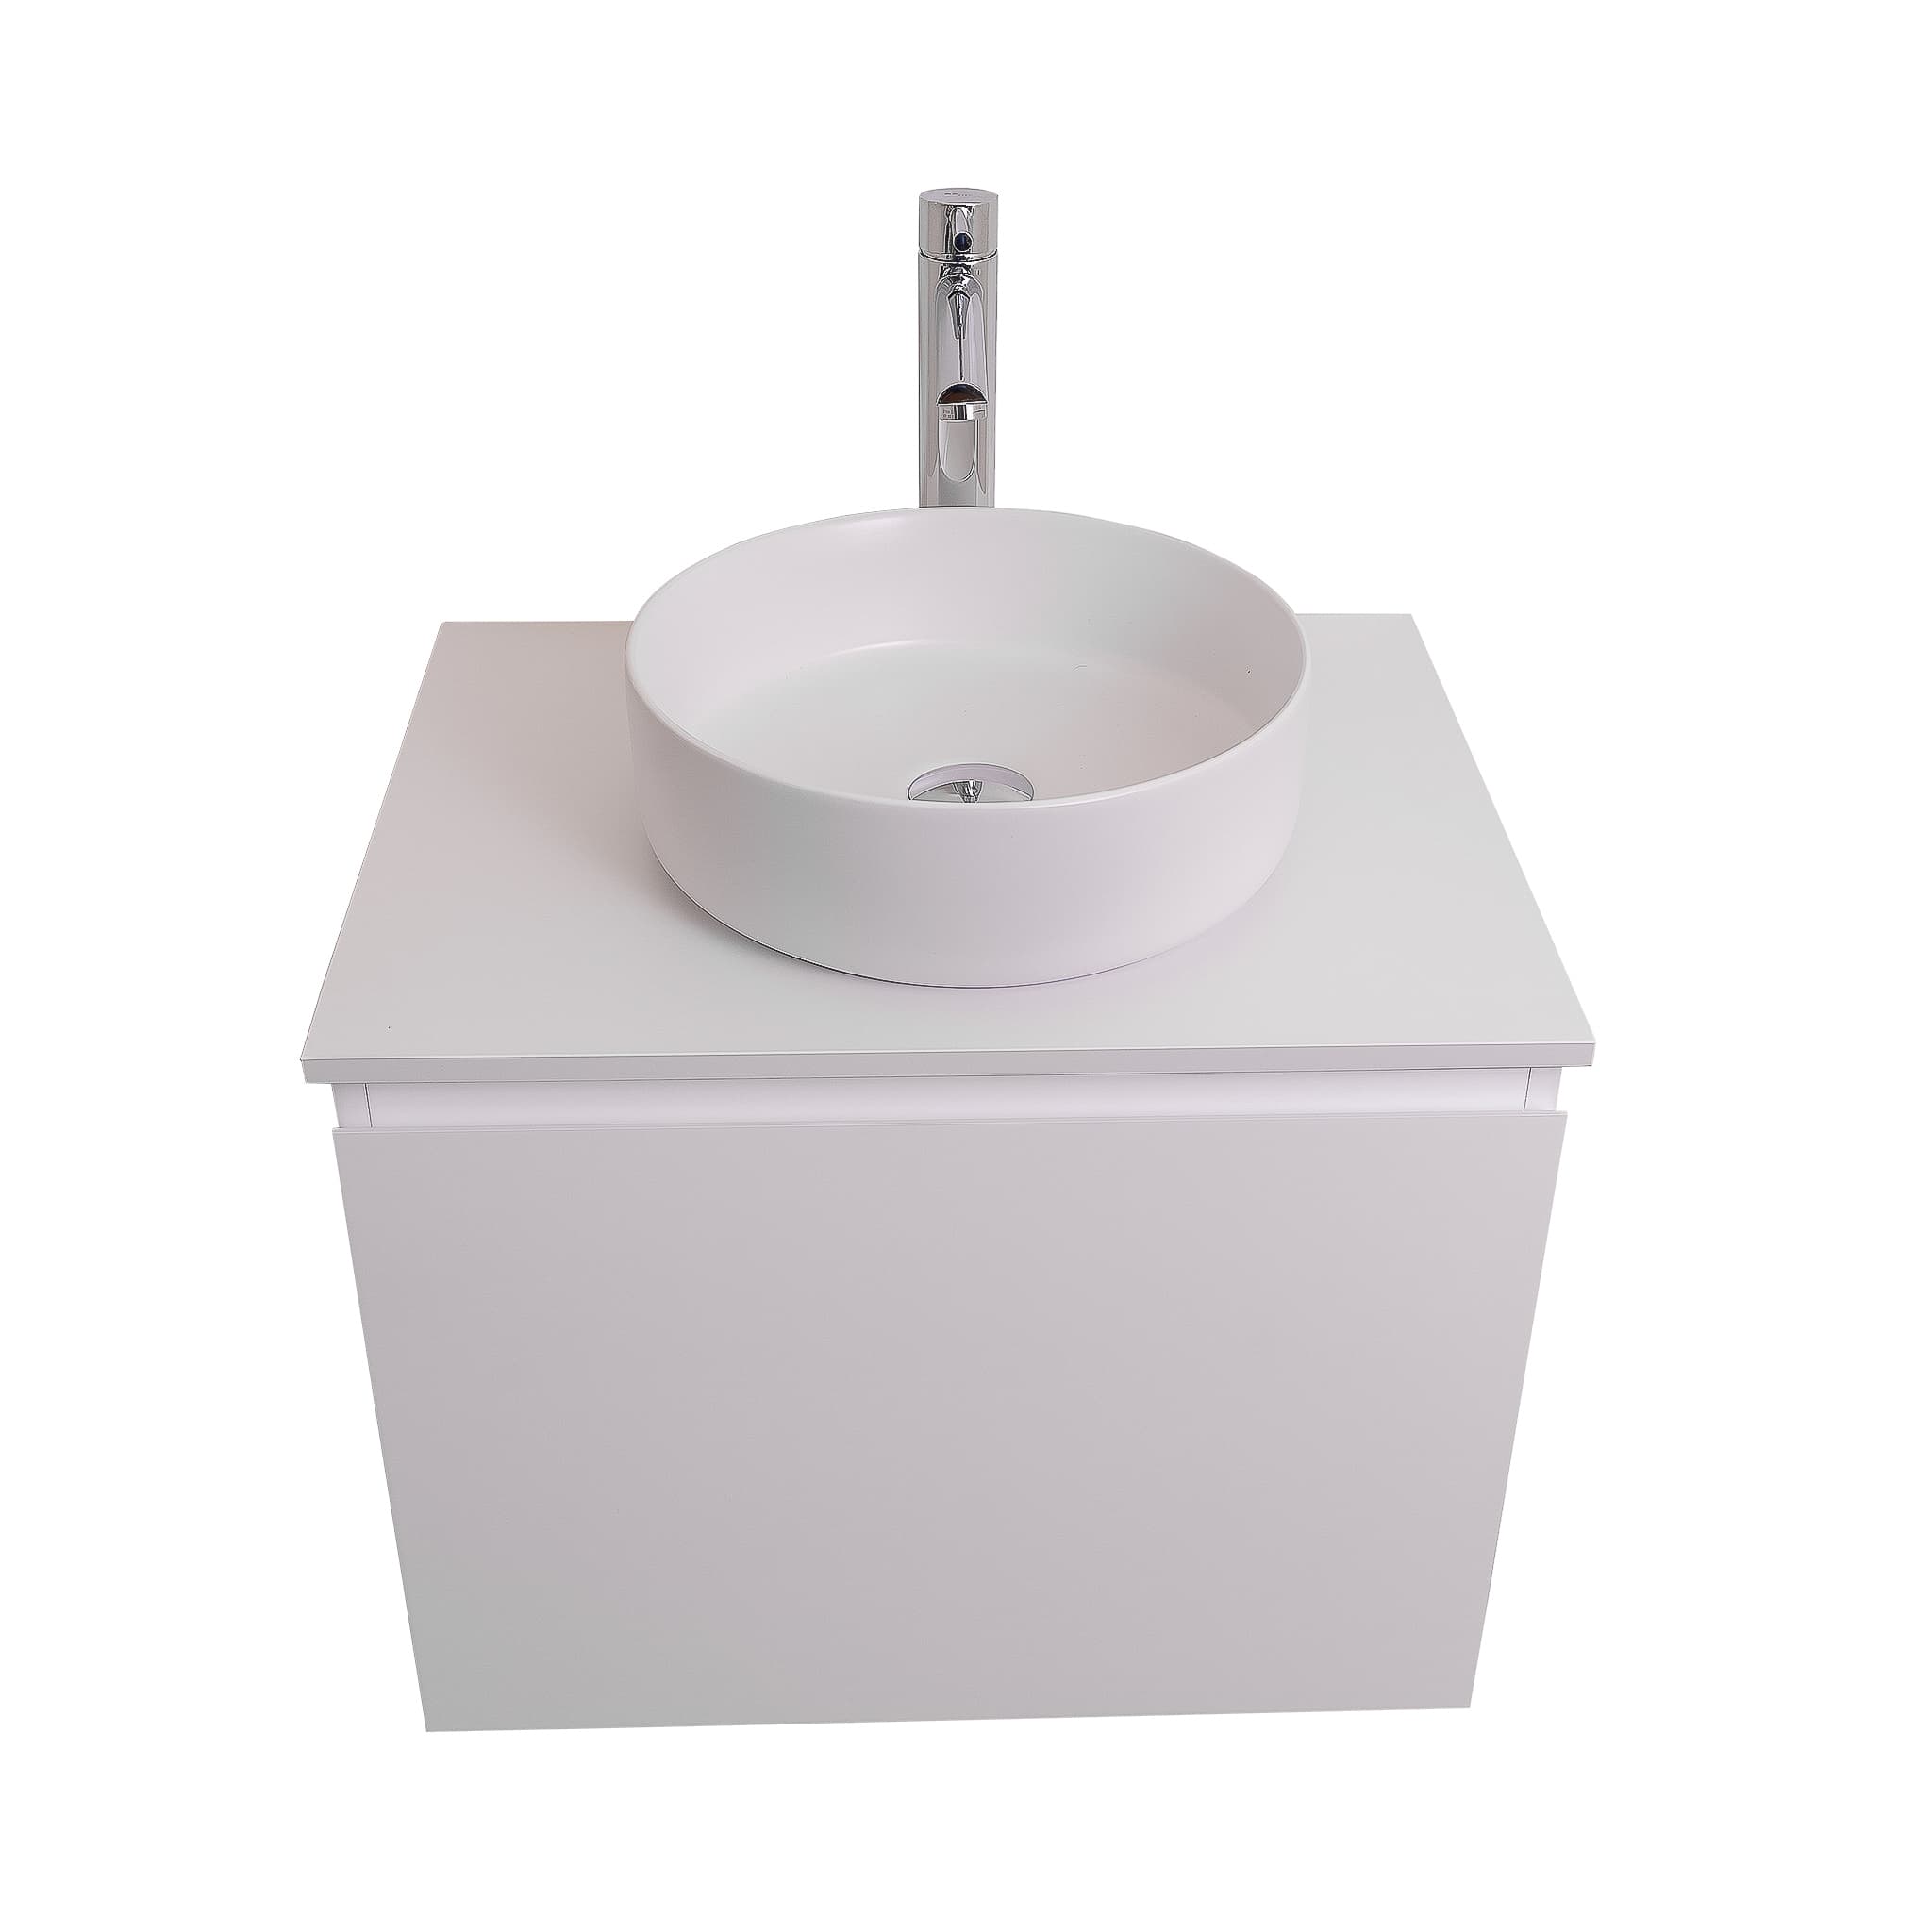 Venice 23.5 White High Gloss Cabinet, Ares White Top And Ares White Ceramic Basin, Wall Mounted Modern Vanity Set